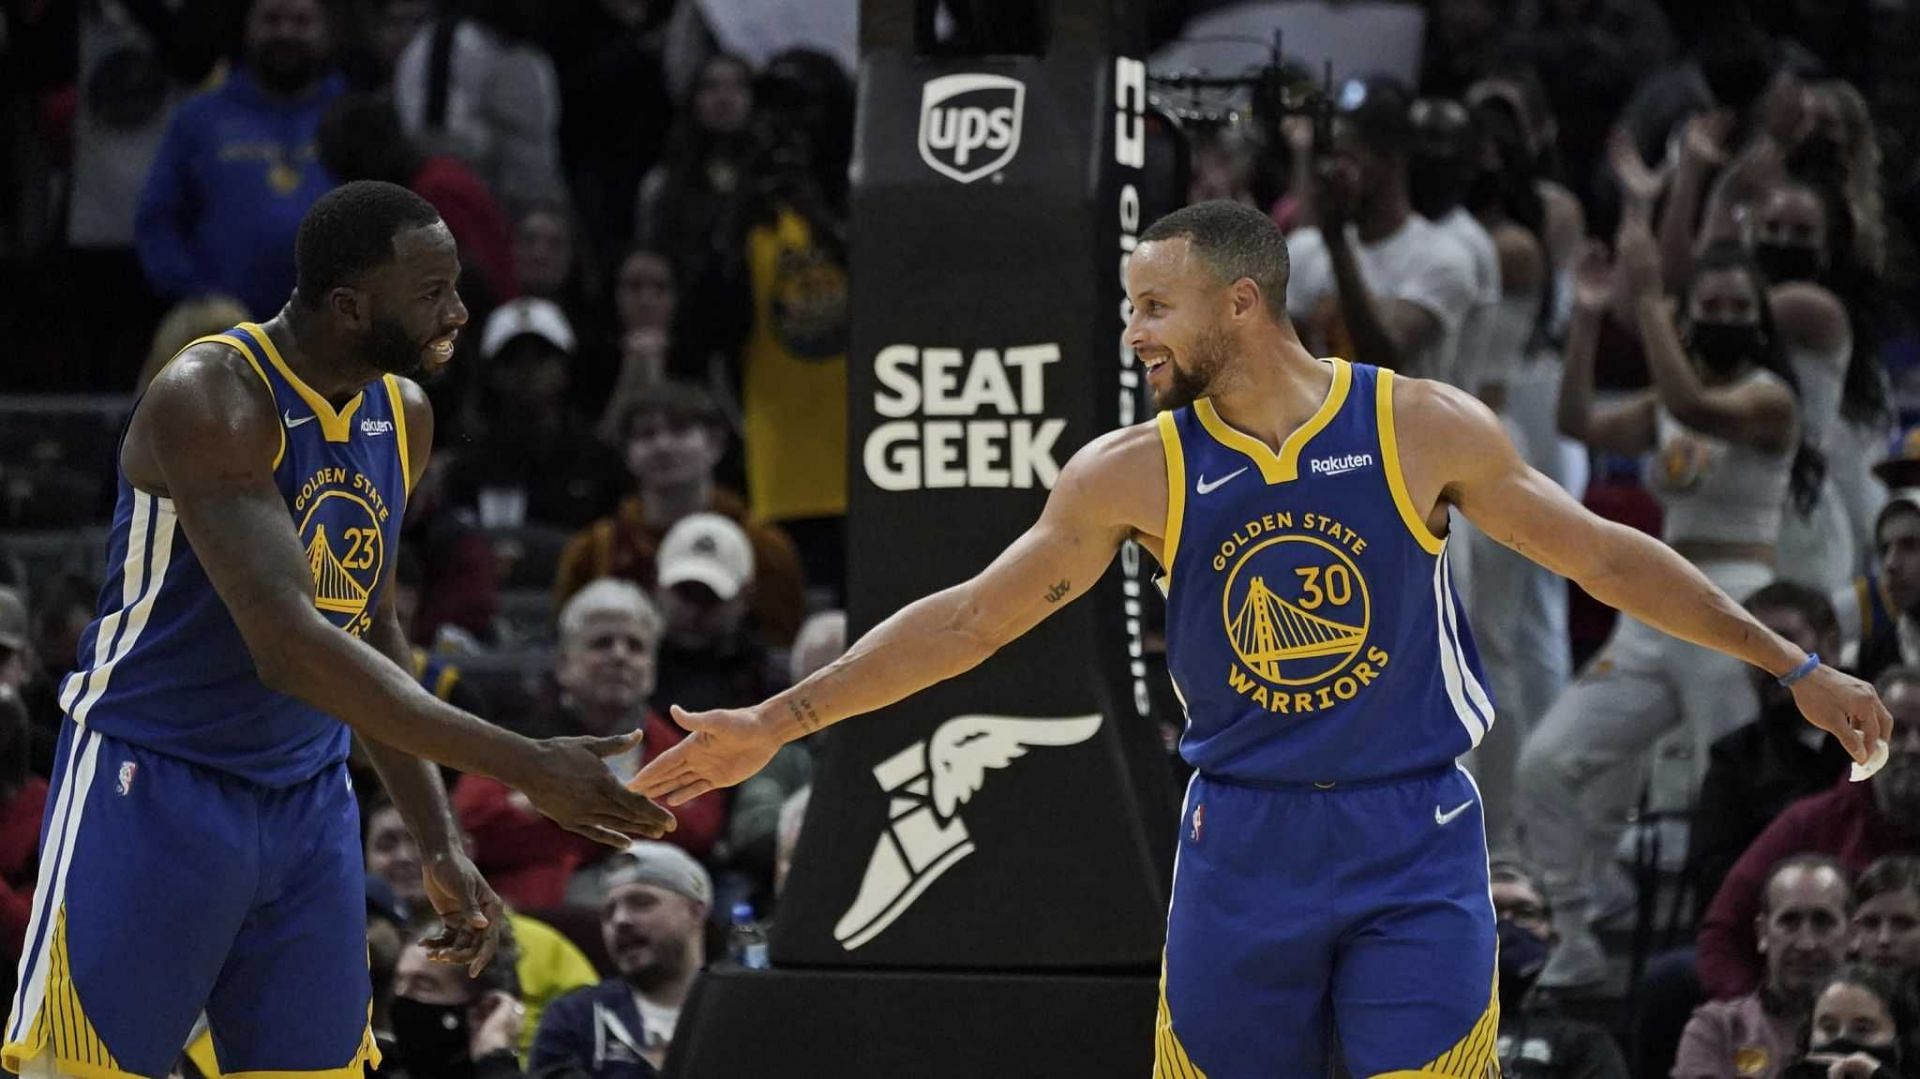 NBA superstars enjoy differential treatment by game officials. [Photo: San Francisco Chronicle]